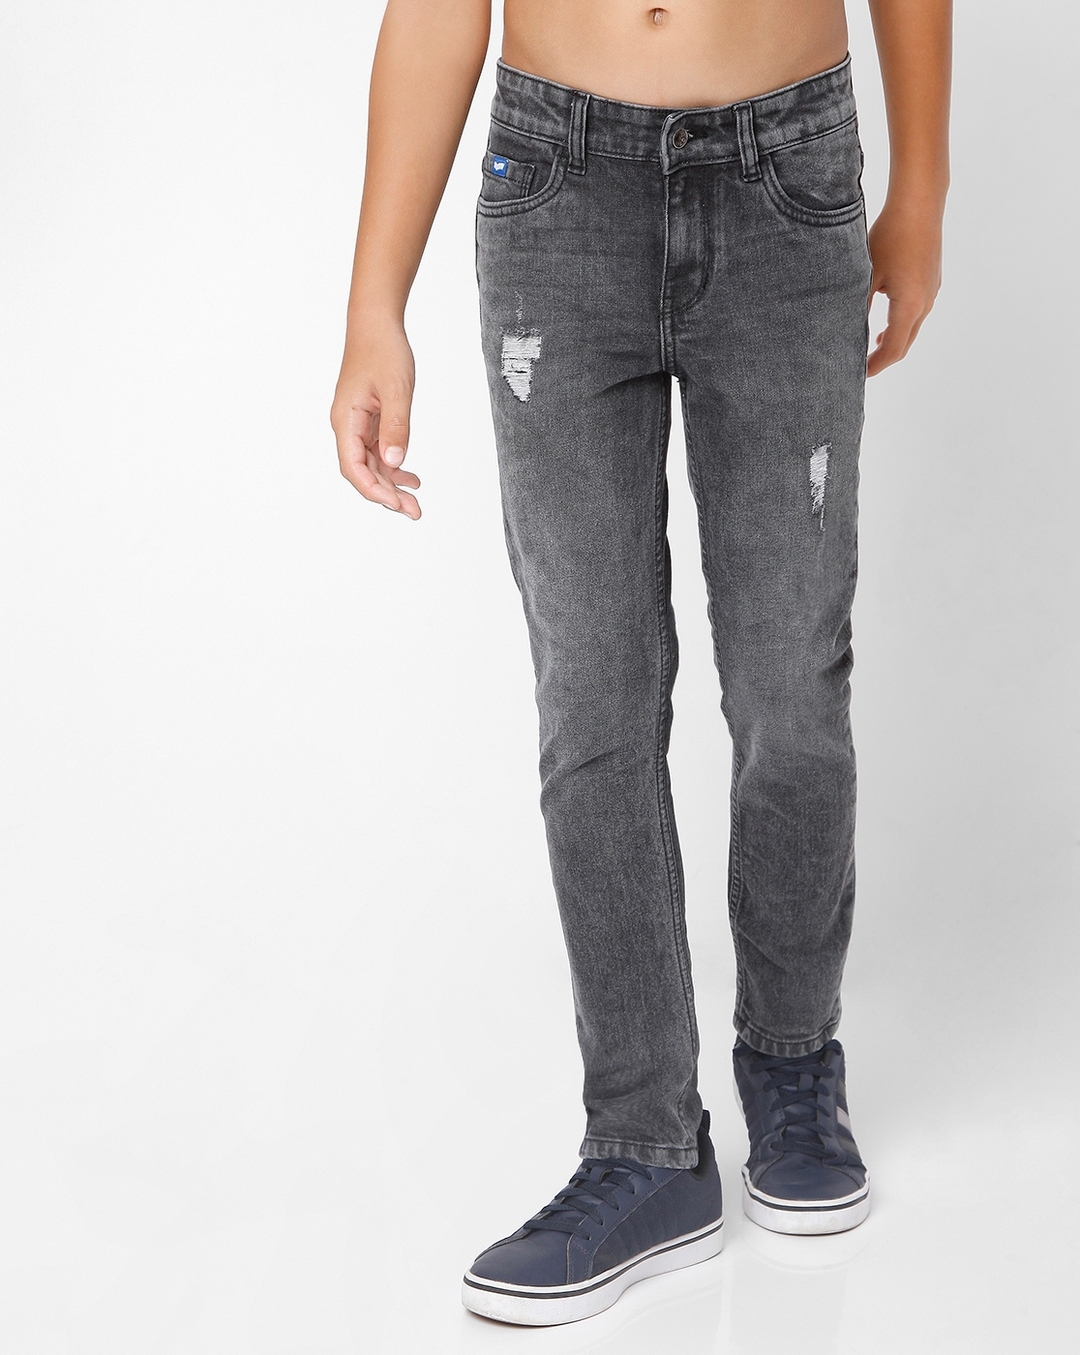 Course Cargo Cafeman Pants Blend Utility With Classic Styling